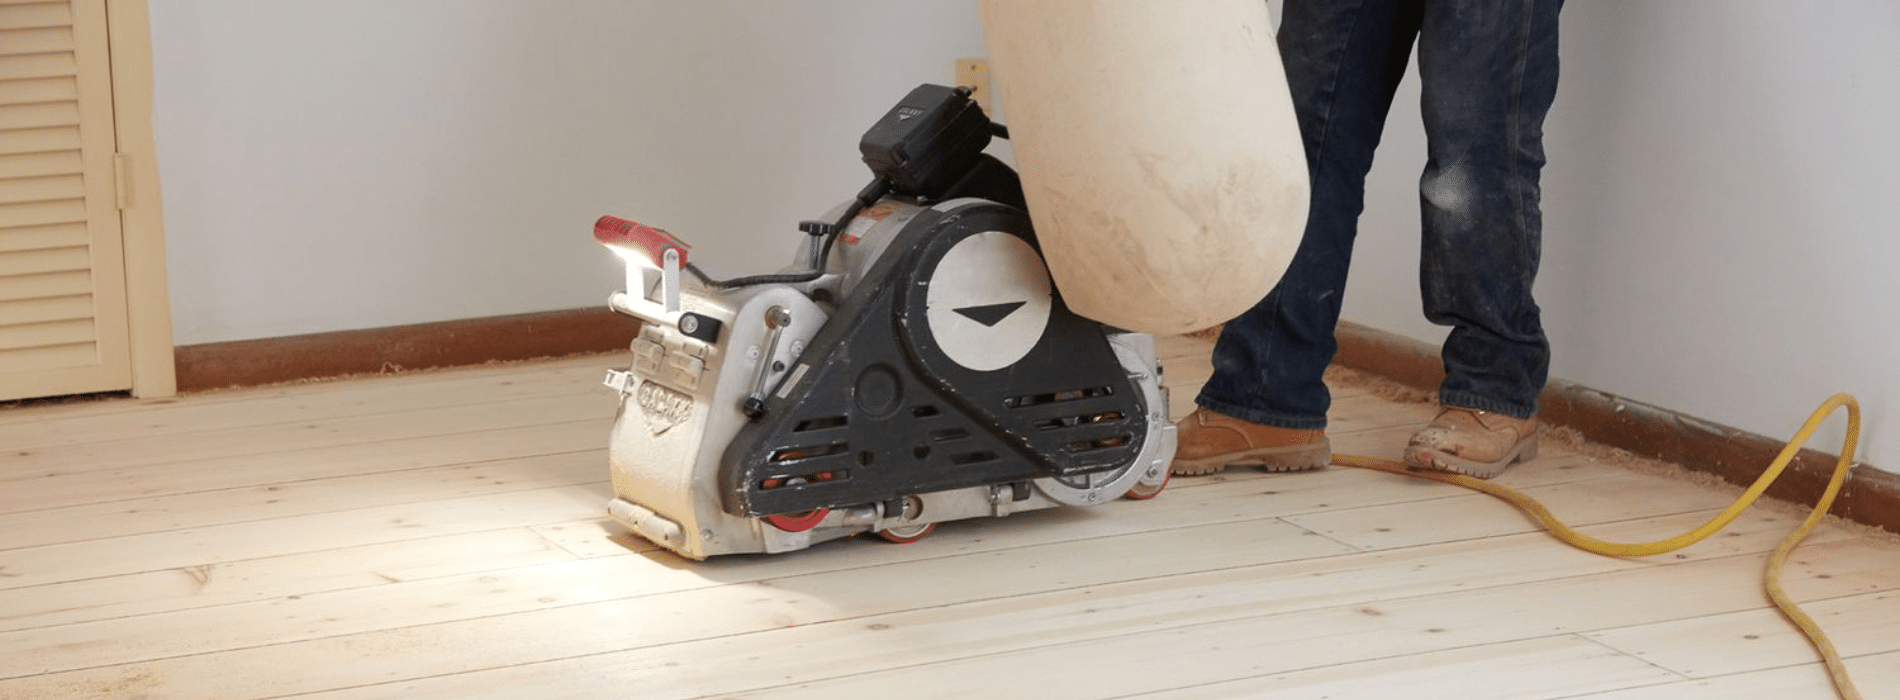 In Chipping Ongar, CM5, Mr Sander® are using a Bona Scorpion, a 200mm belt sander with 1.5 kW power, connected to a dust extraction system. The system has a HEPA filter, ensuring a clean and efficient result while sanding a parquet floor. Ideal for achieving high-quality floor sanding.